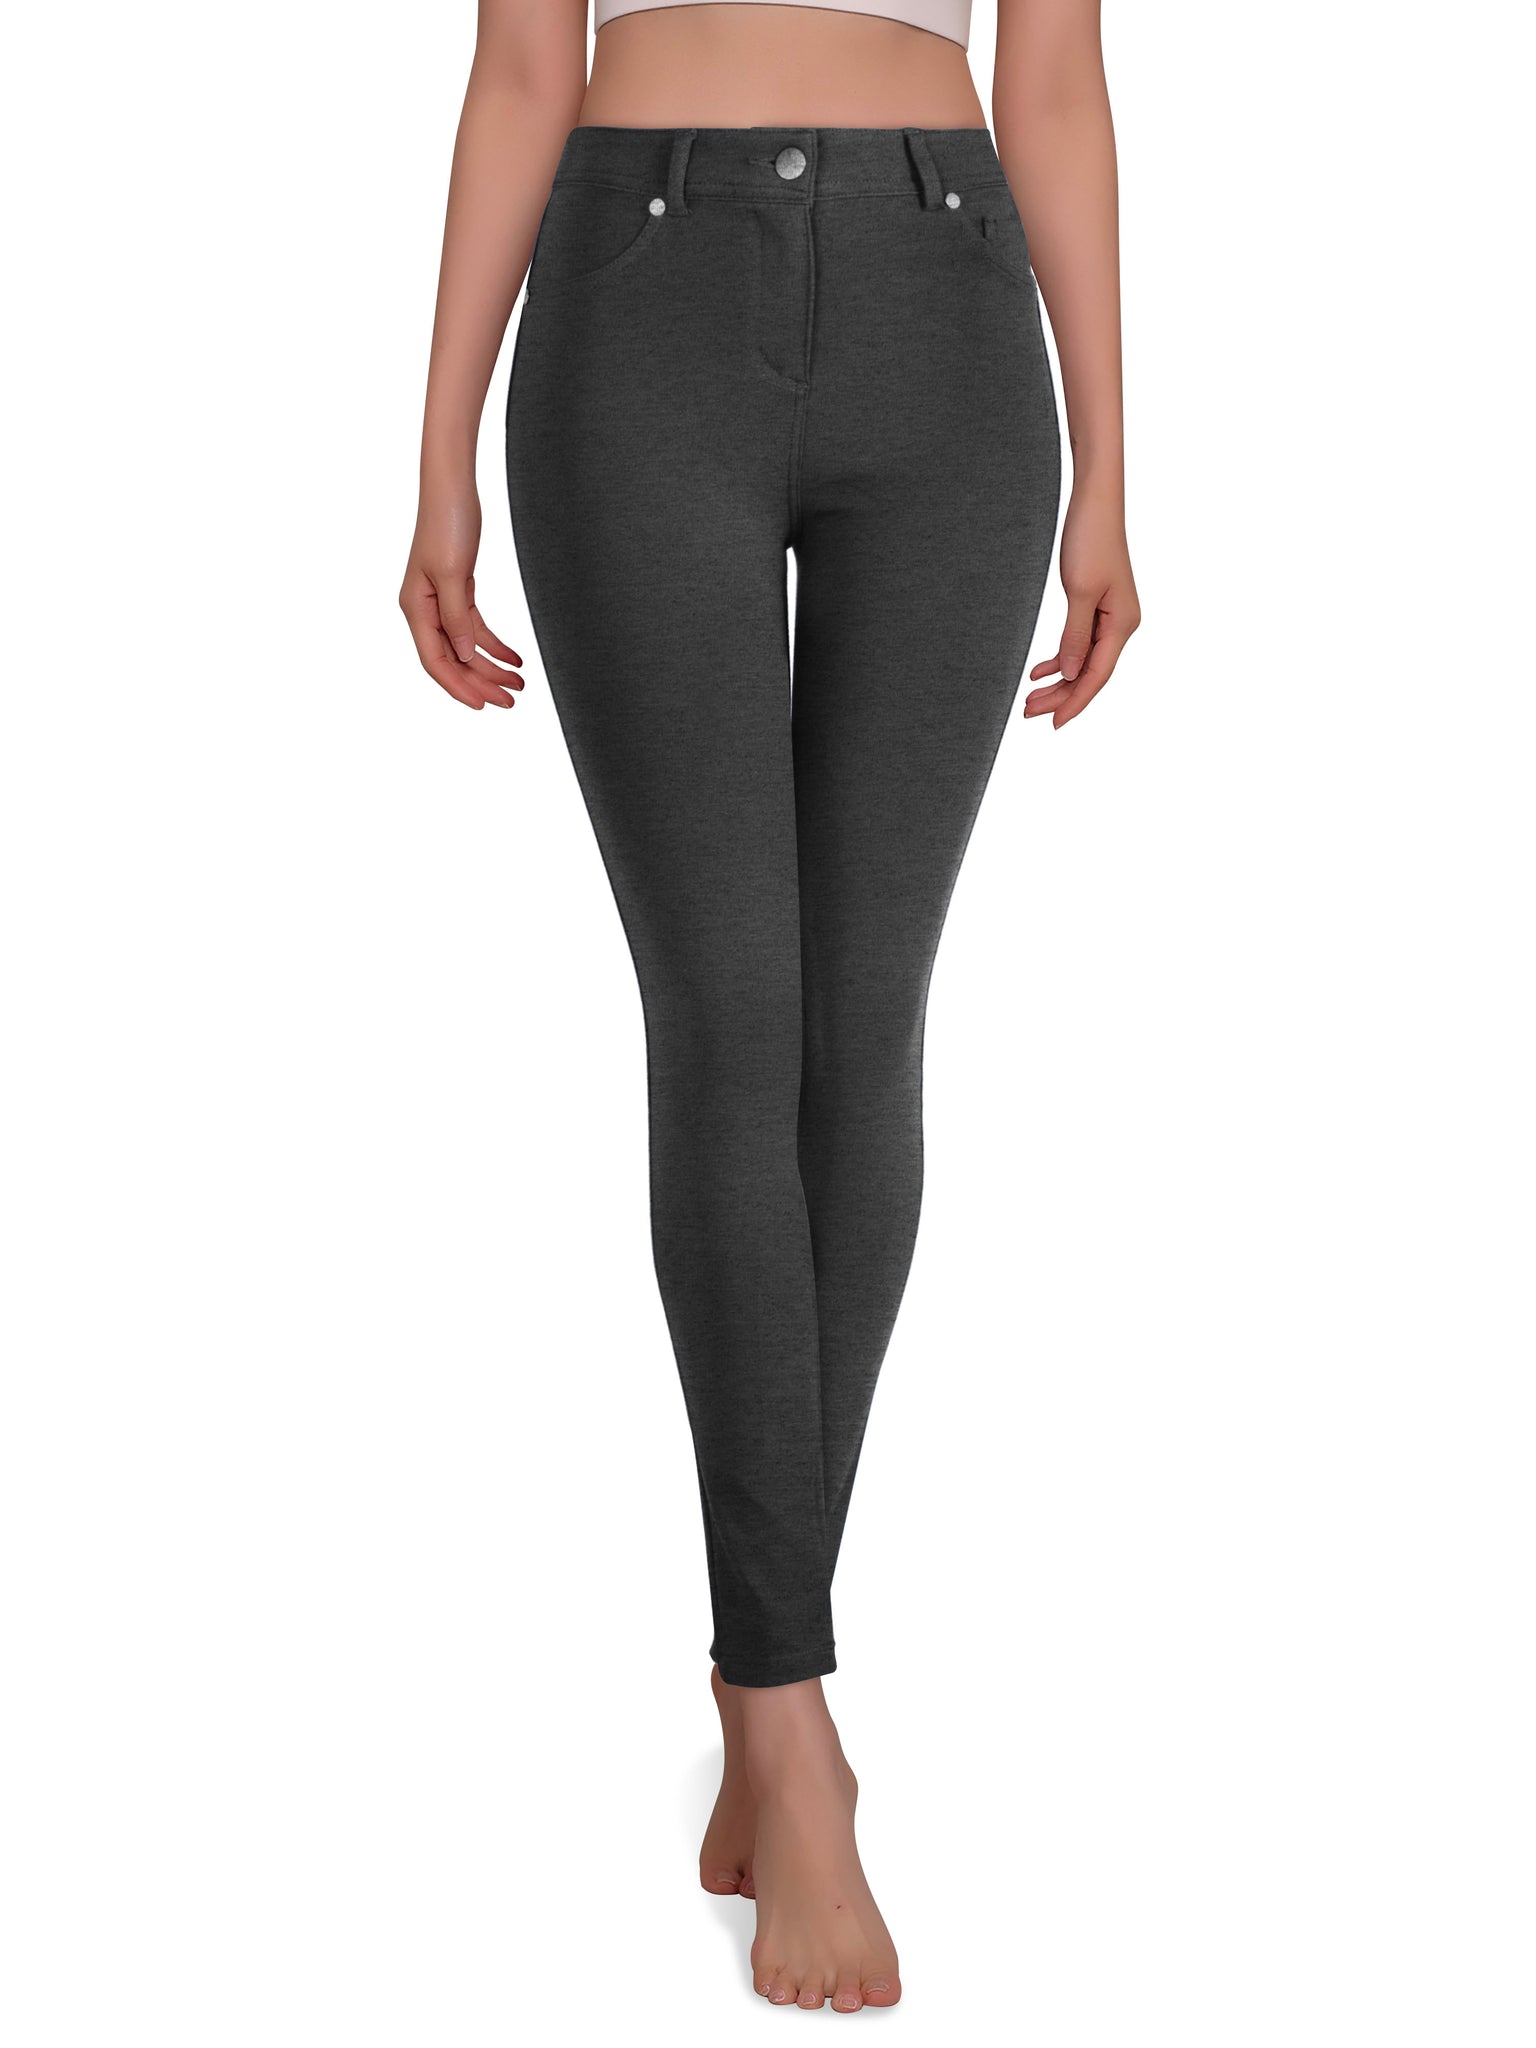 Charcoal grey jeggings for women Compression pant 2 back pkts